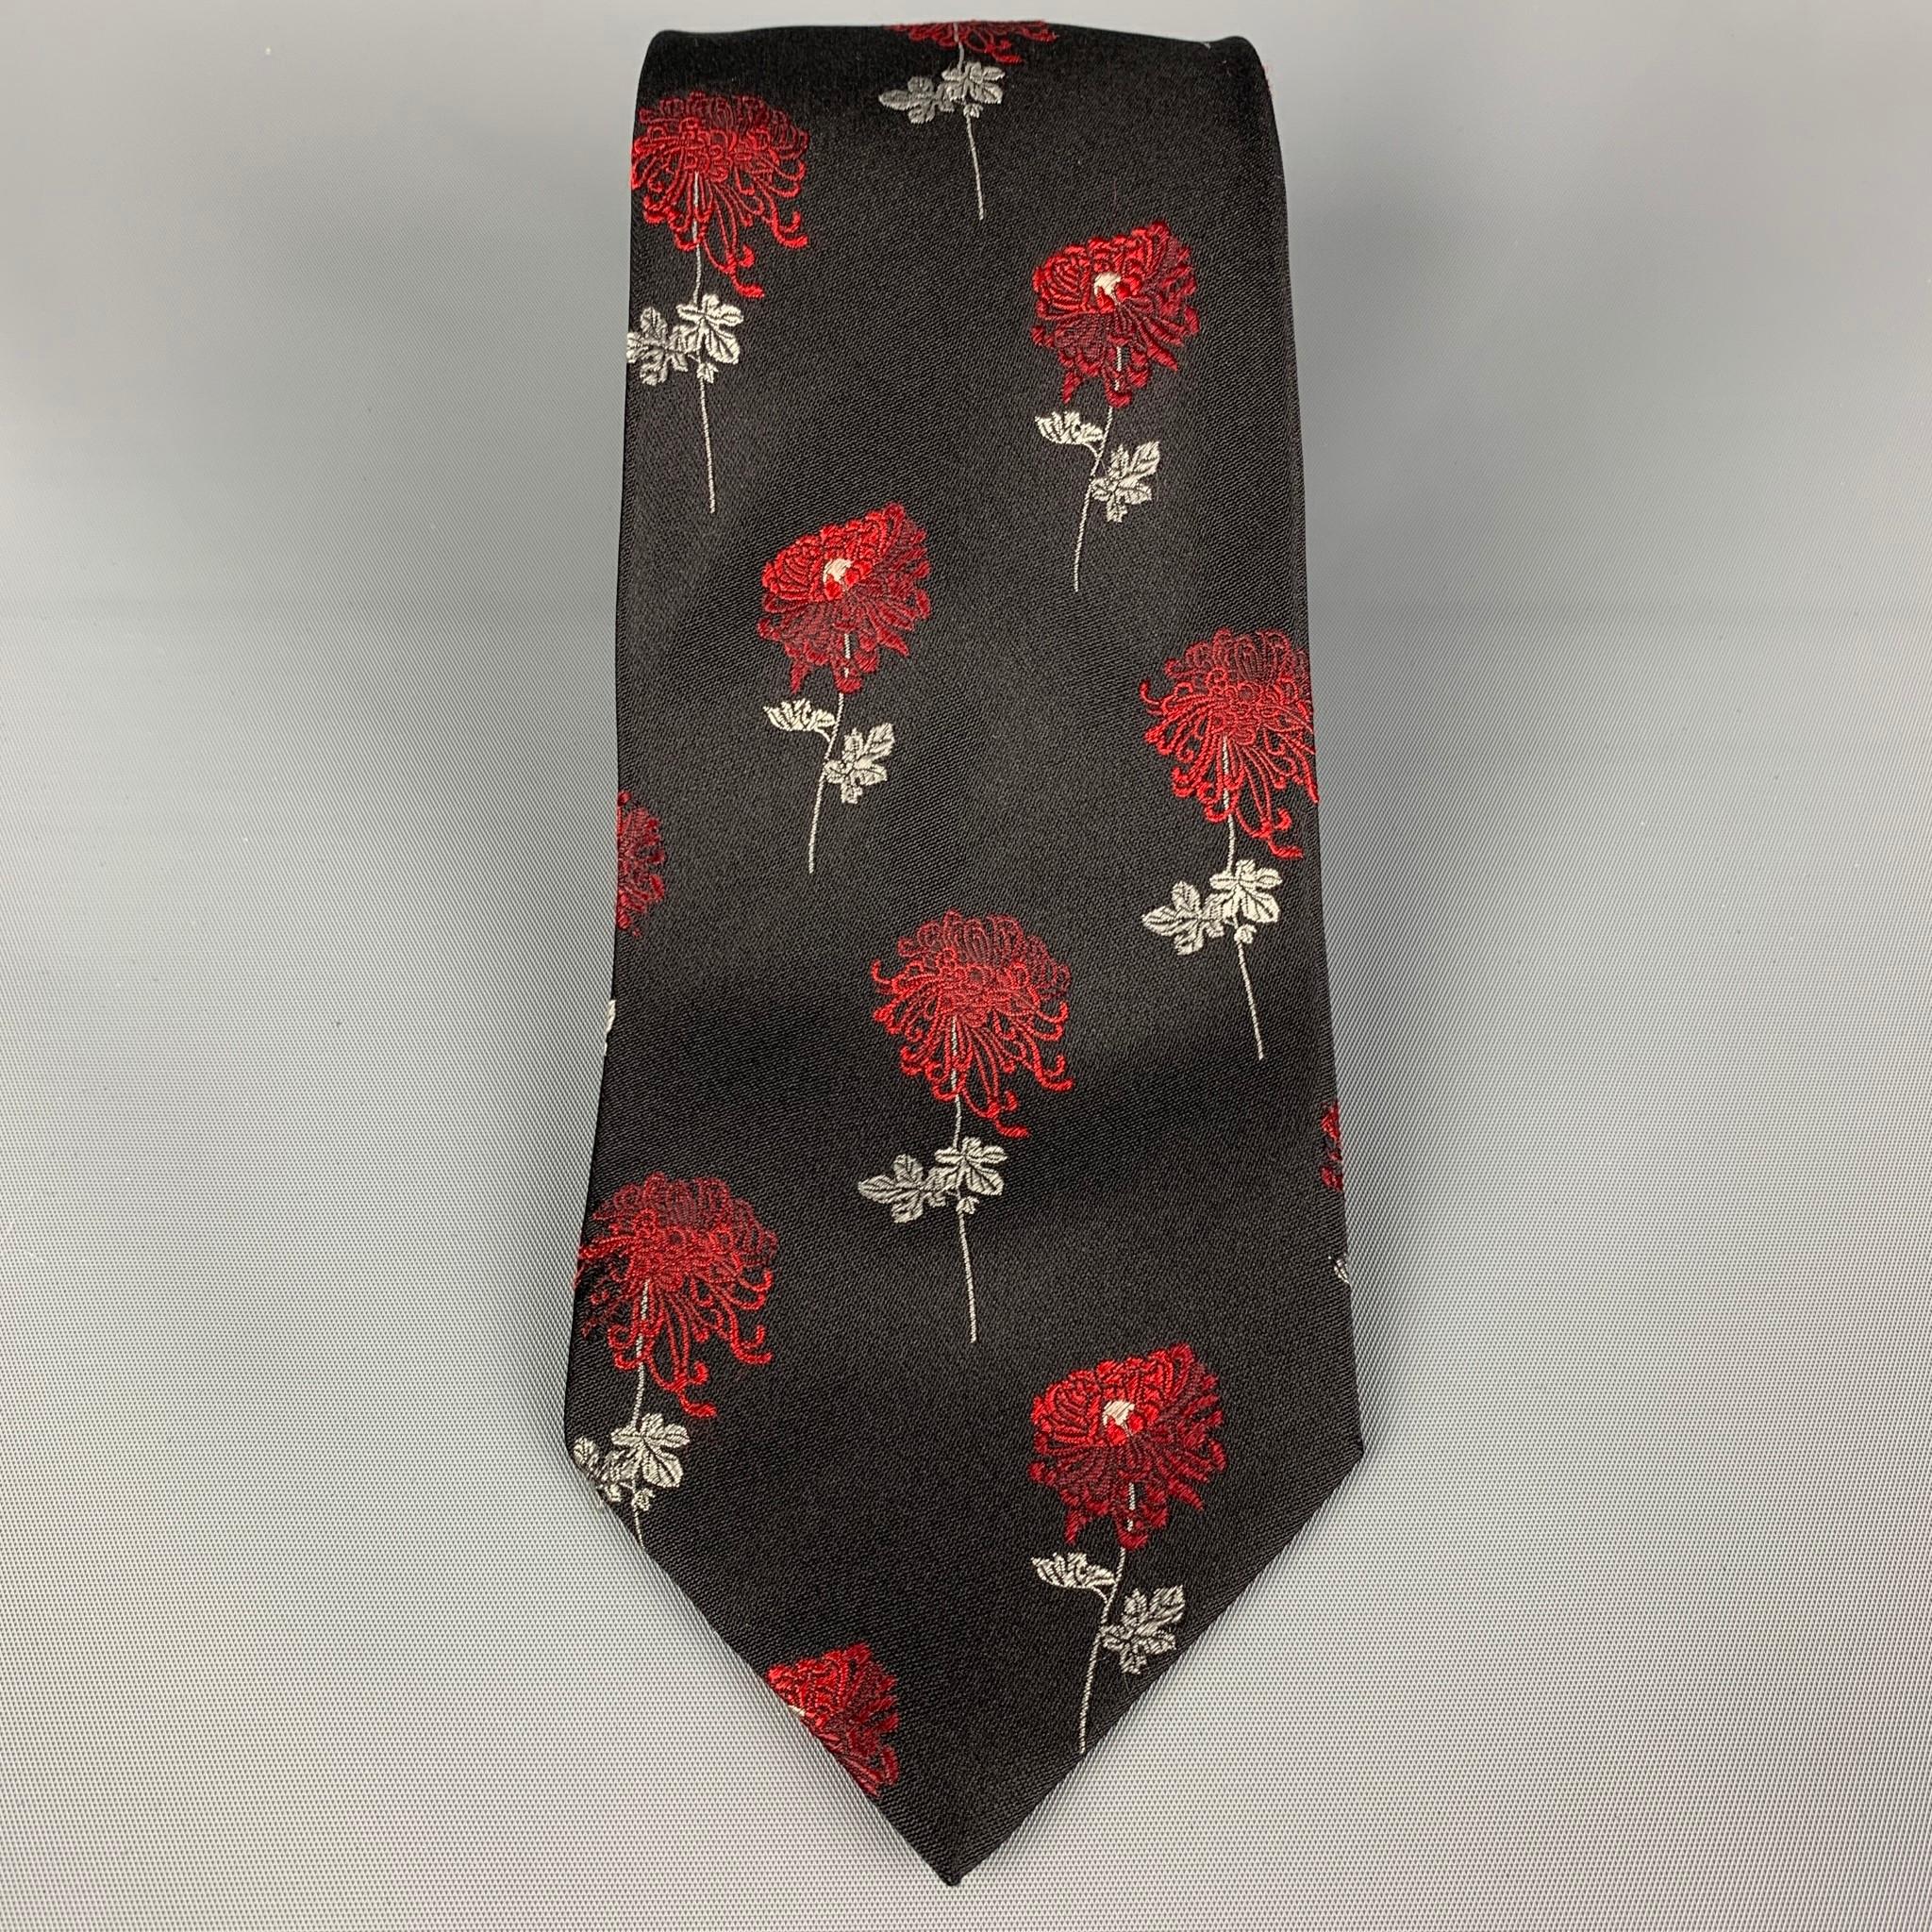 GUCCI by Tom Ford neck tie comes in a black & red silk with a chrysanthemum embroidered design print. Made in Italy. 

Very Good Pre-Owned Condition.

Measurements:

Width: 3.75 in. 